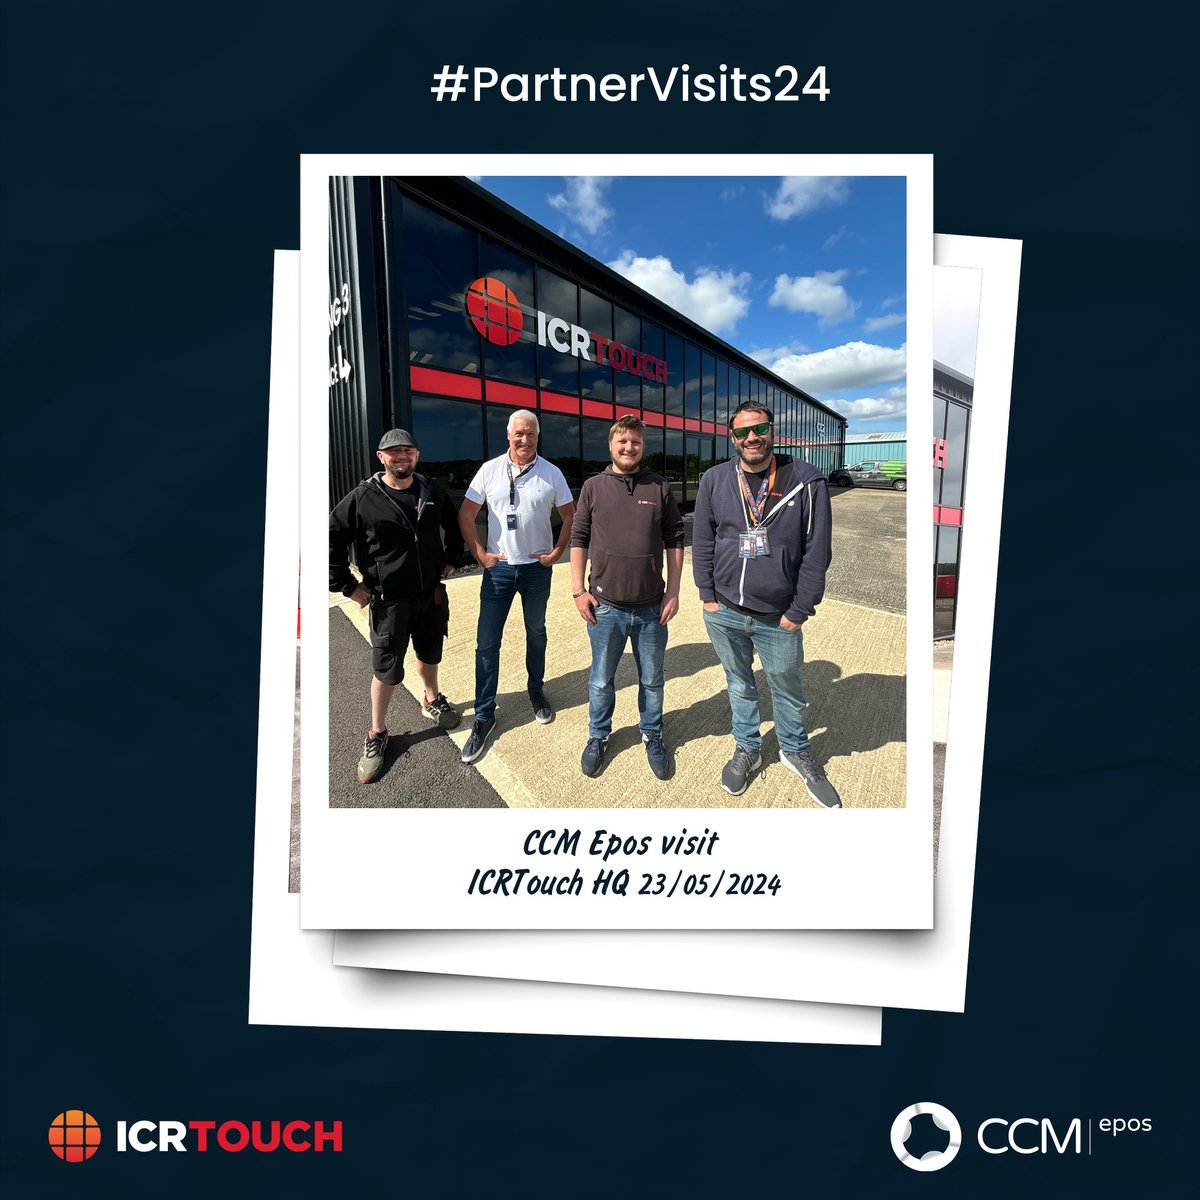 Last week CCM EPoS came to visit the ICRTouch HQ! 😊

Giles travelled down from Bournemouth to catch up with Partner Relations and to meet some of the team 🤝 Looking forward to meeting again soon 👋

#partnervisits24 #weareICRTouch